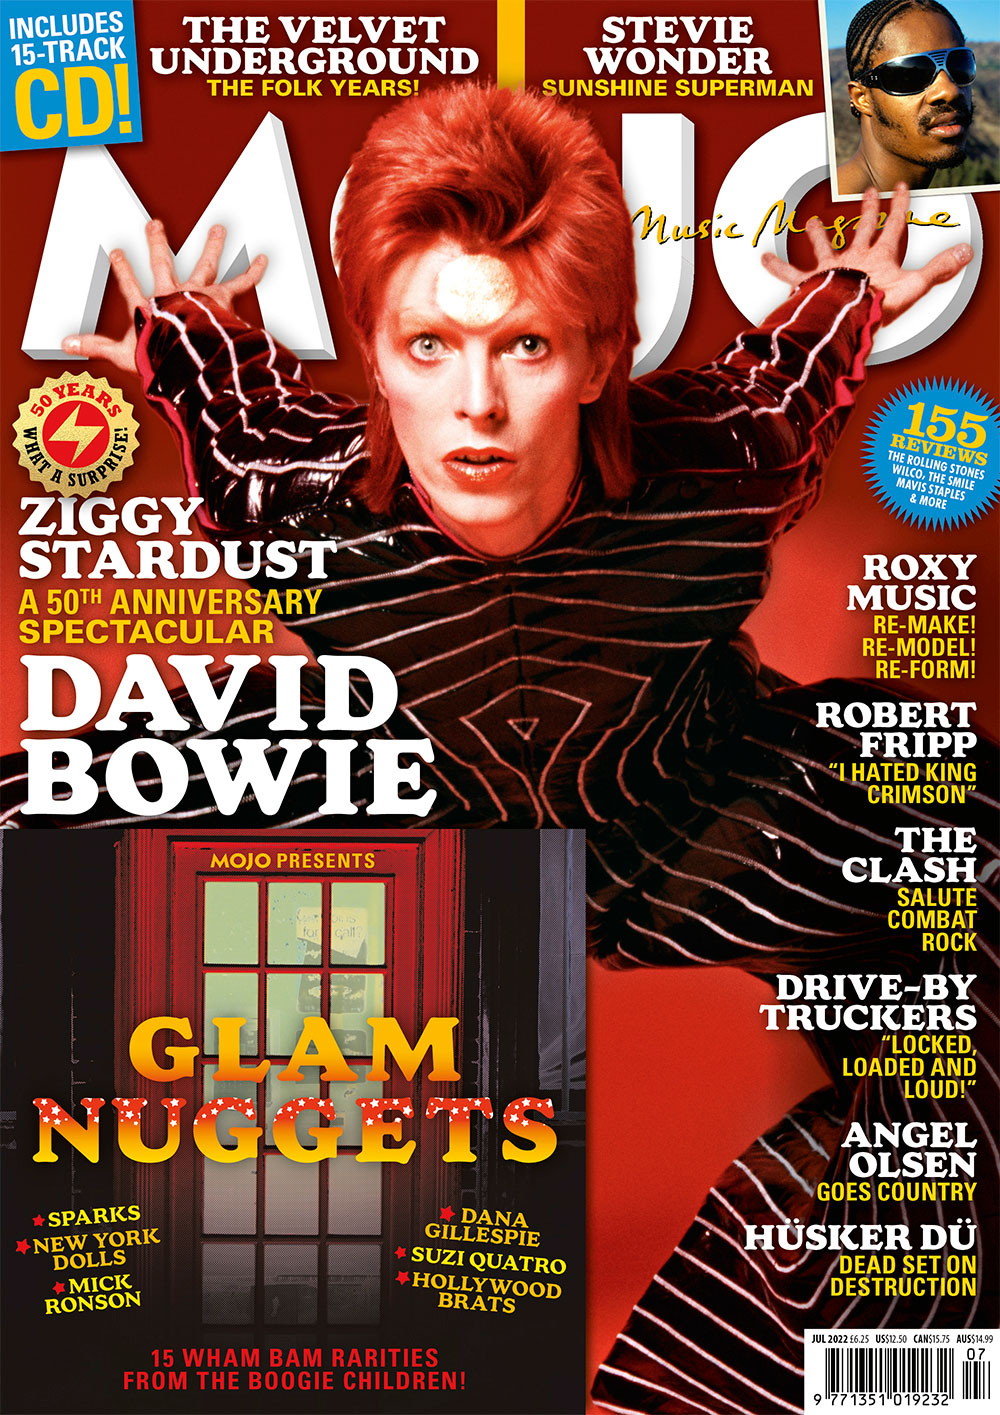 Spider From Mars: My Life With Bowie' by Woody Woodmansey